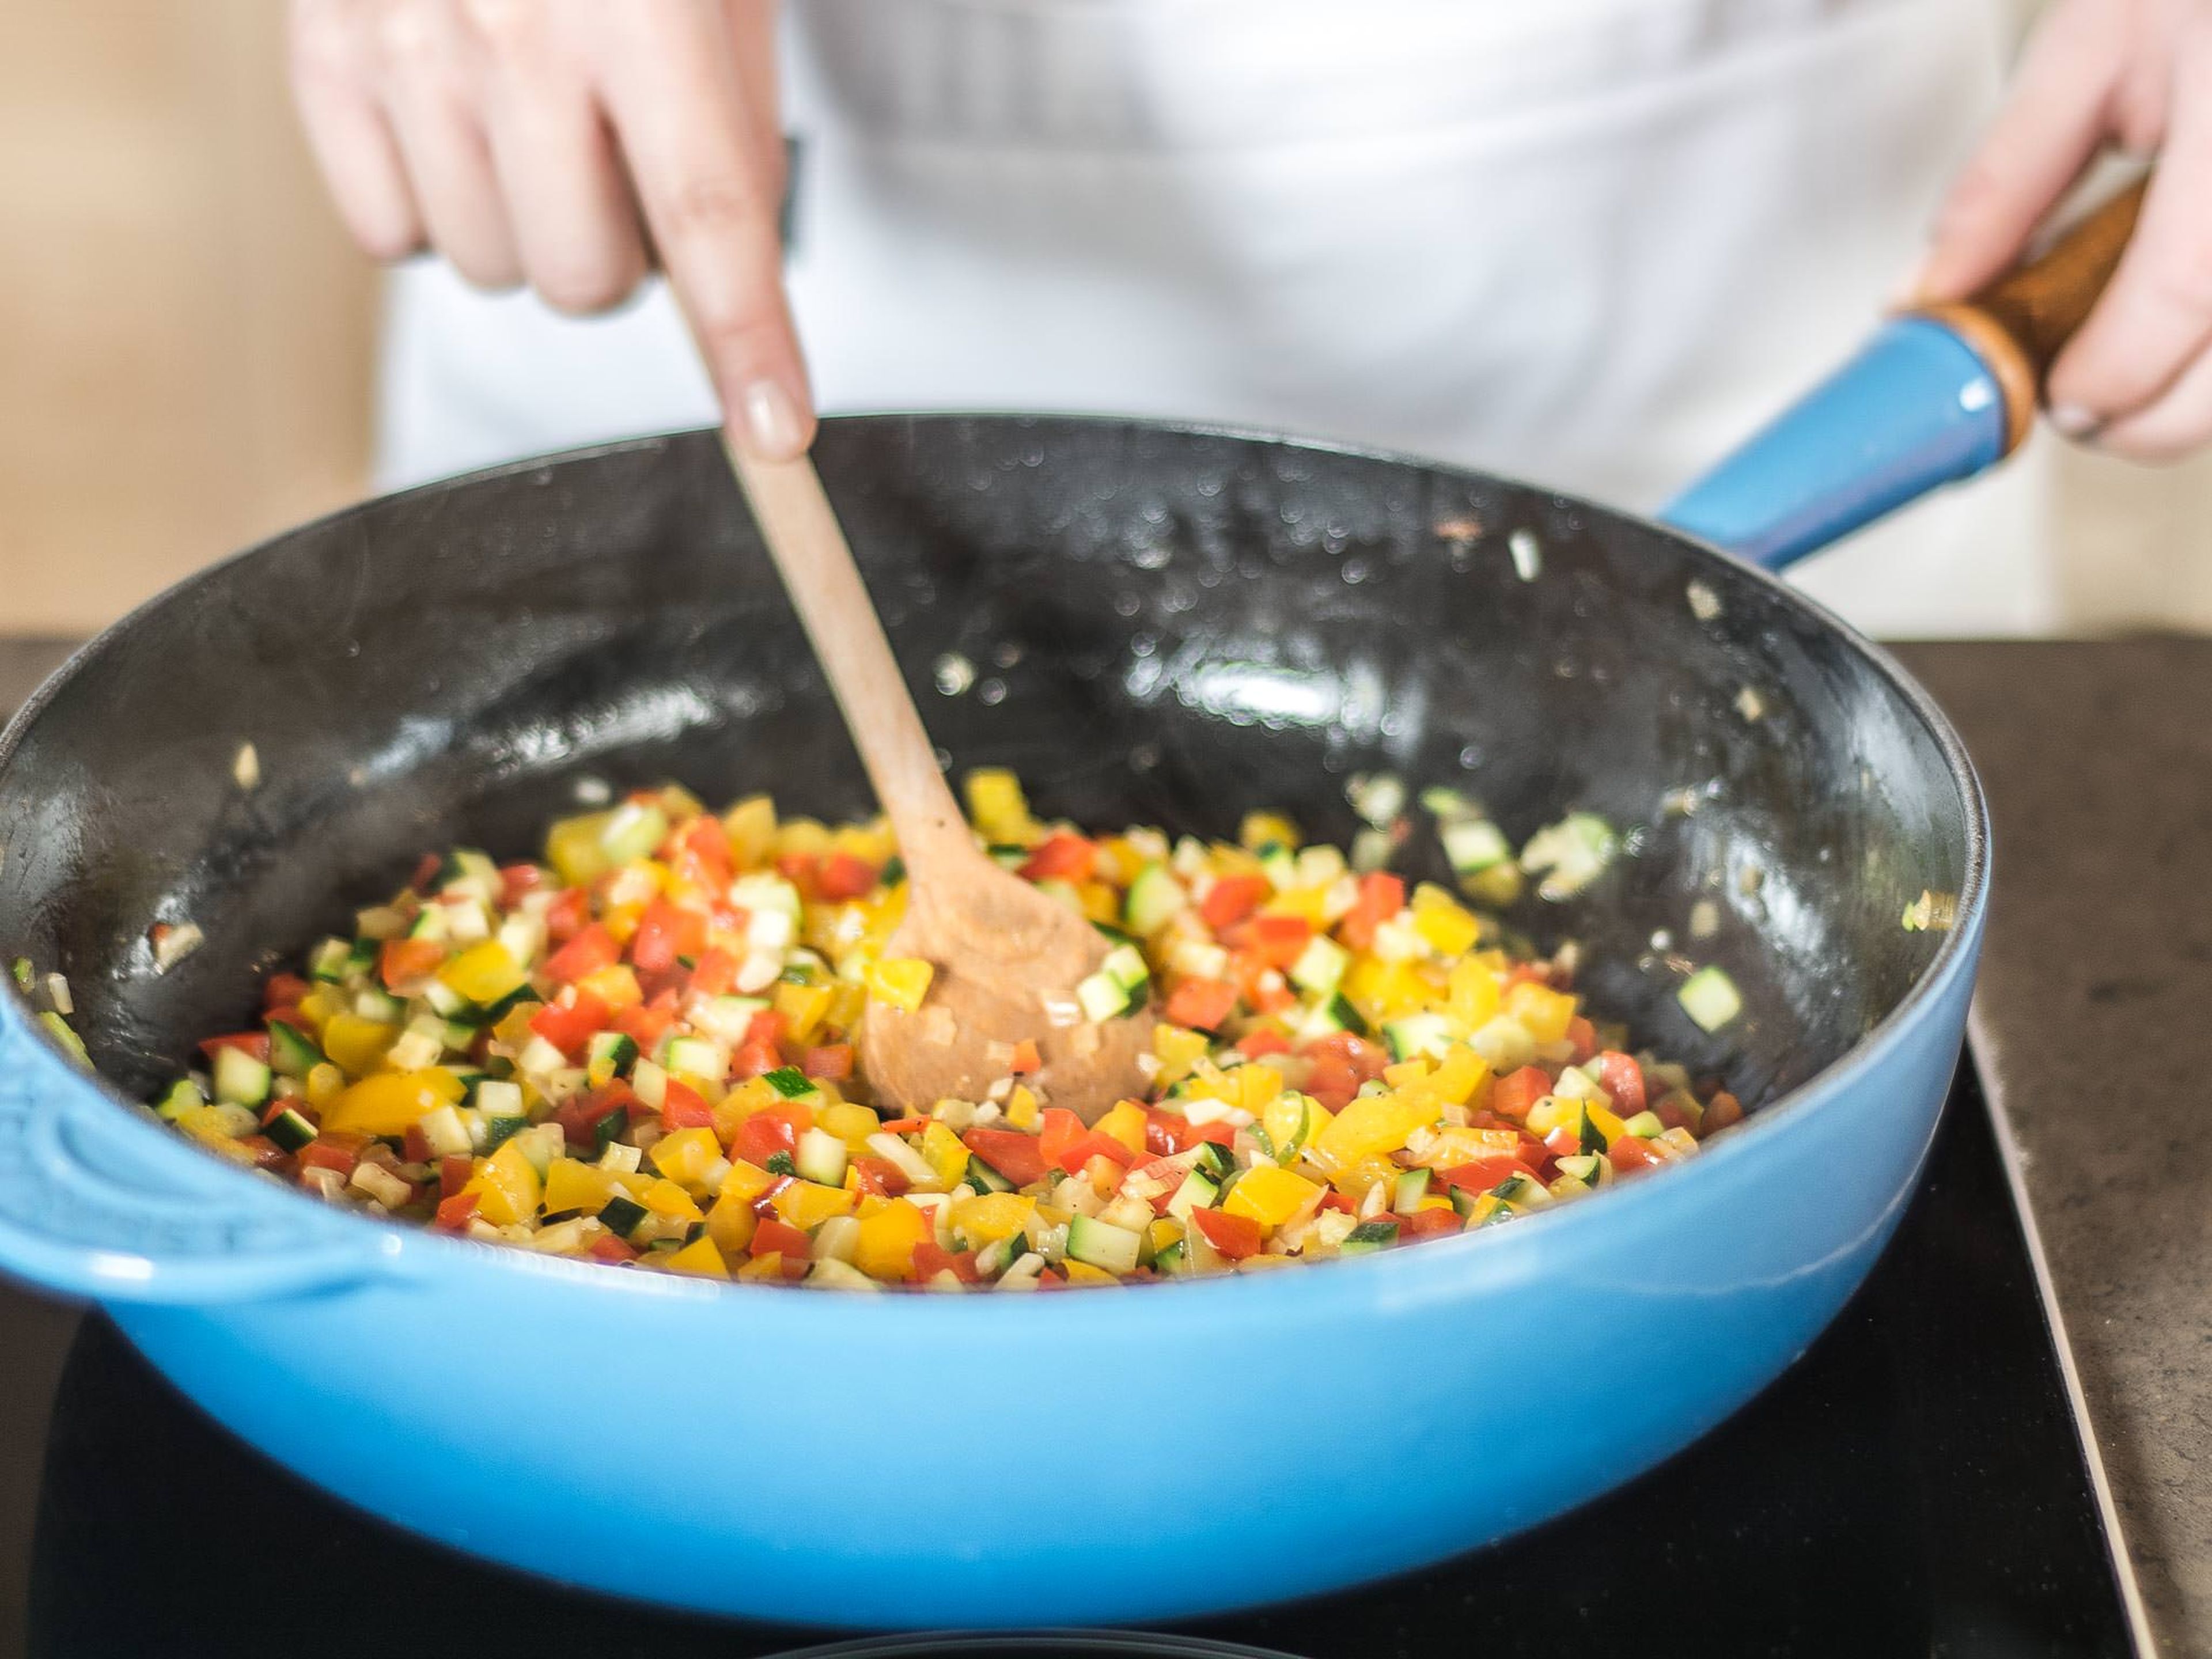 Add the garlic, shallots, and chopped vegetables to a large frying pan and sauté with some olive oil. Season with cayenne pepper, salt, and pepper and leave to cool.